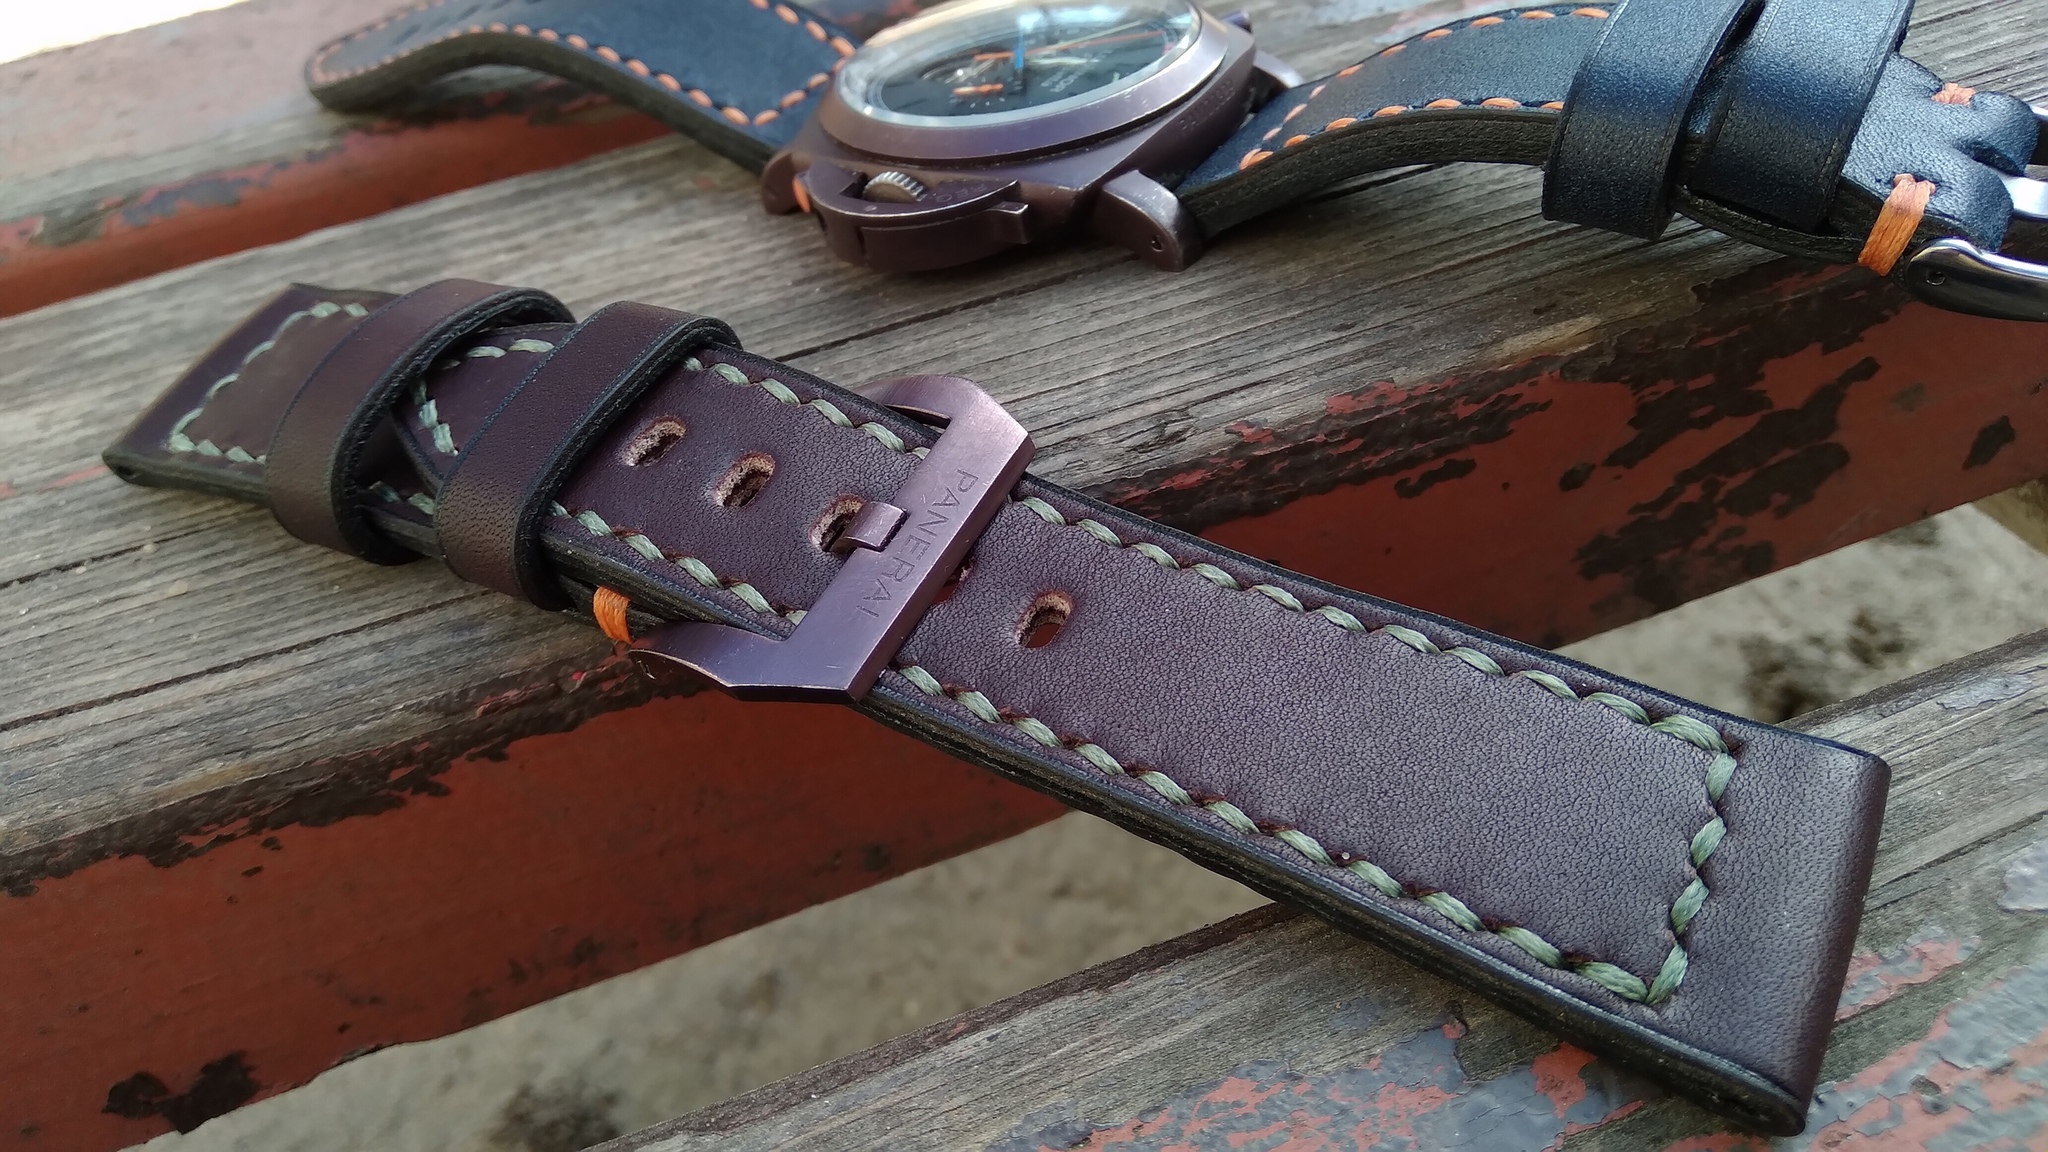 Straps for Panerai watches. - My, Needlework with process, Leather products, Strap, Wrist Watch, Natural leather, Mechanical watches, Handmade, Male style, , Belt, Panerai, With your own hands, Longpost